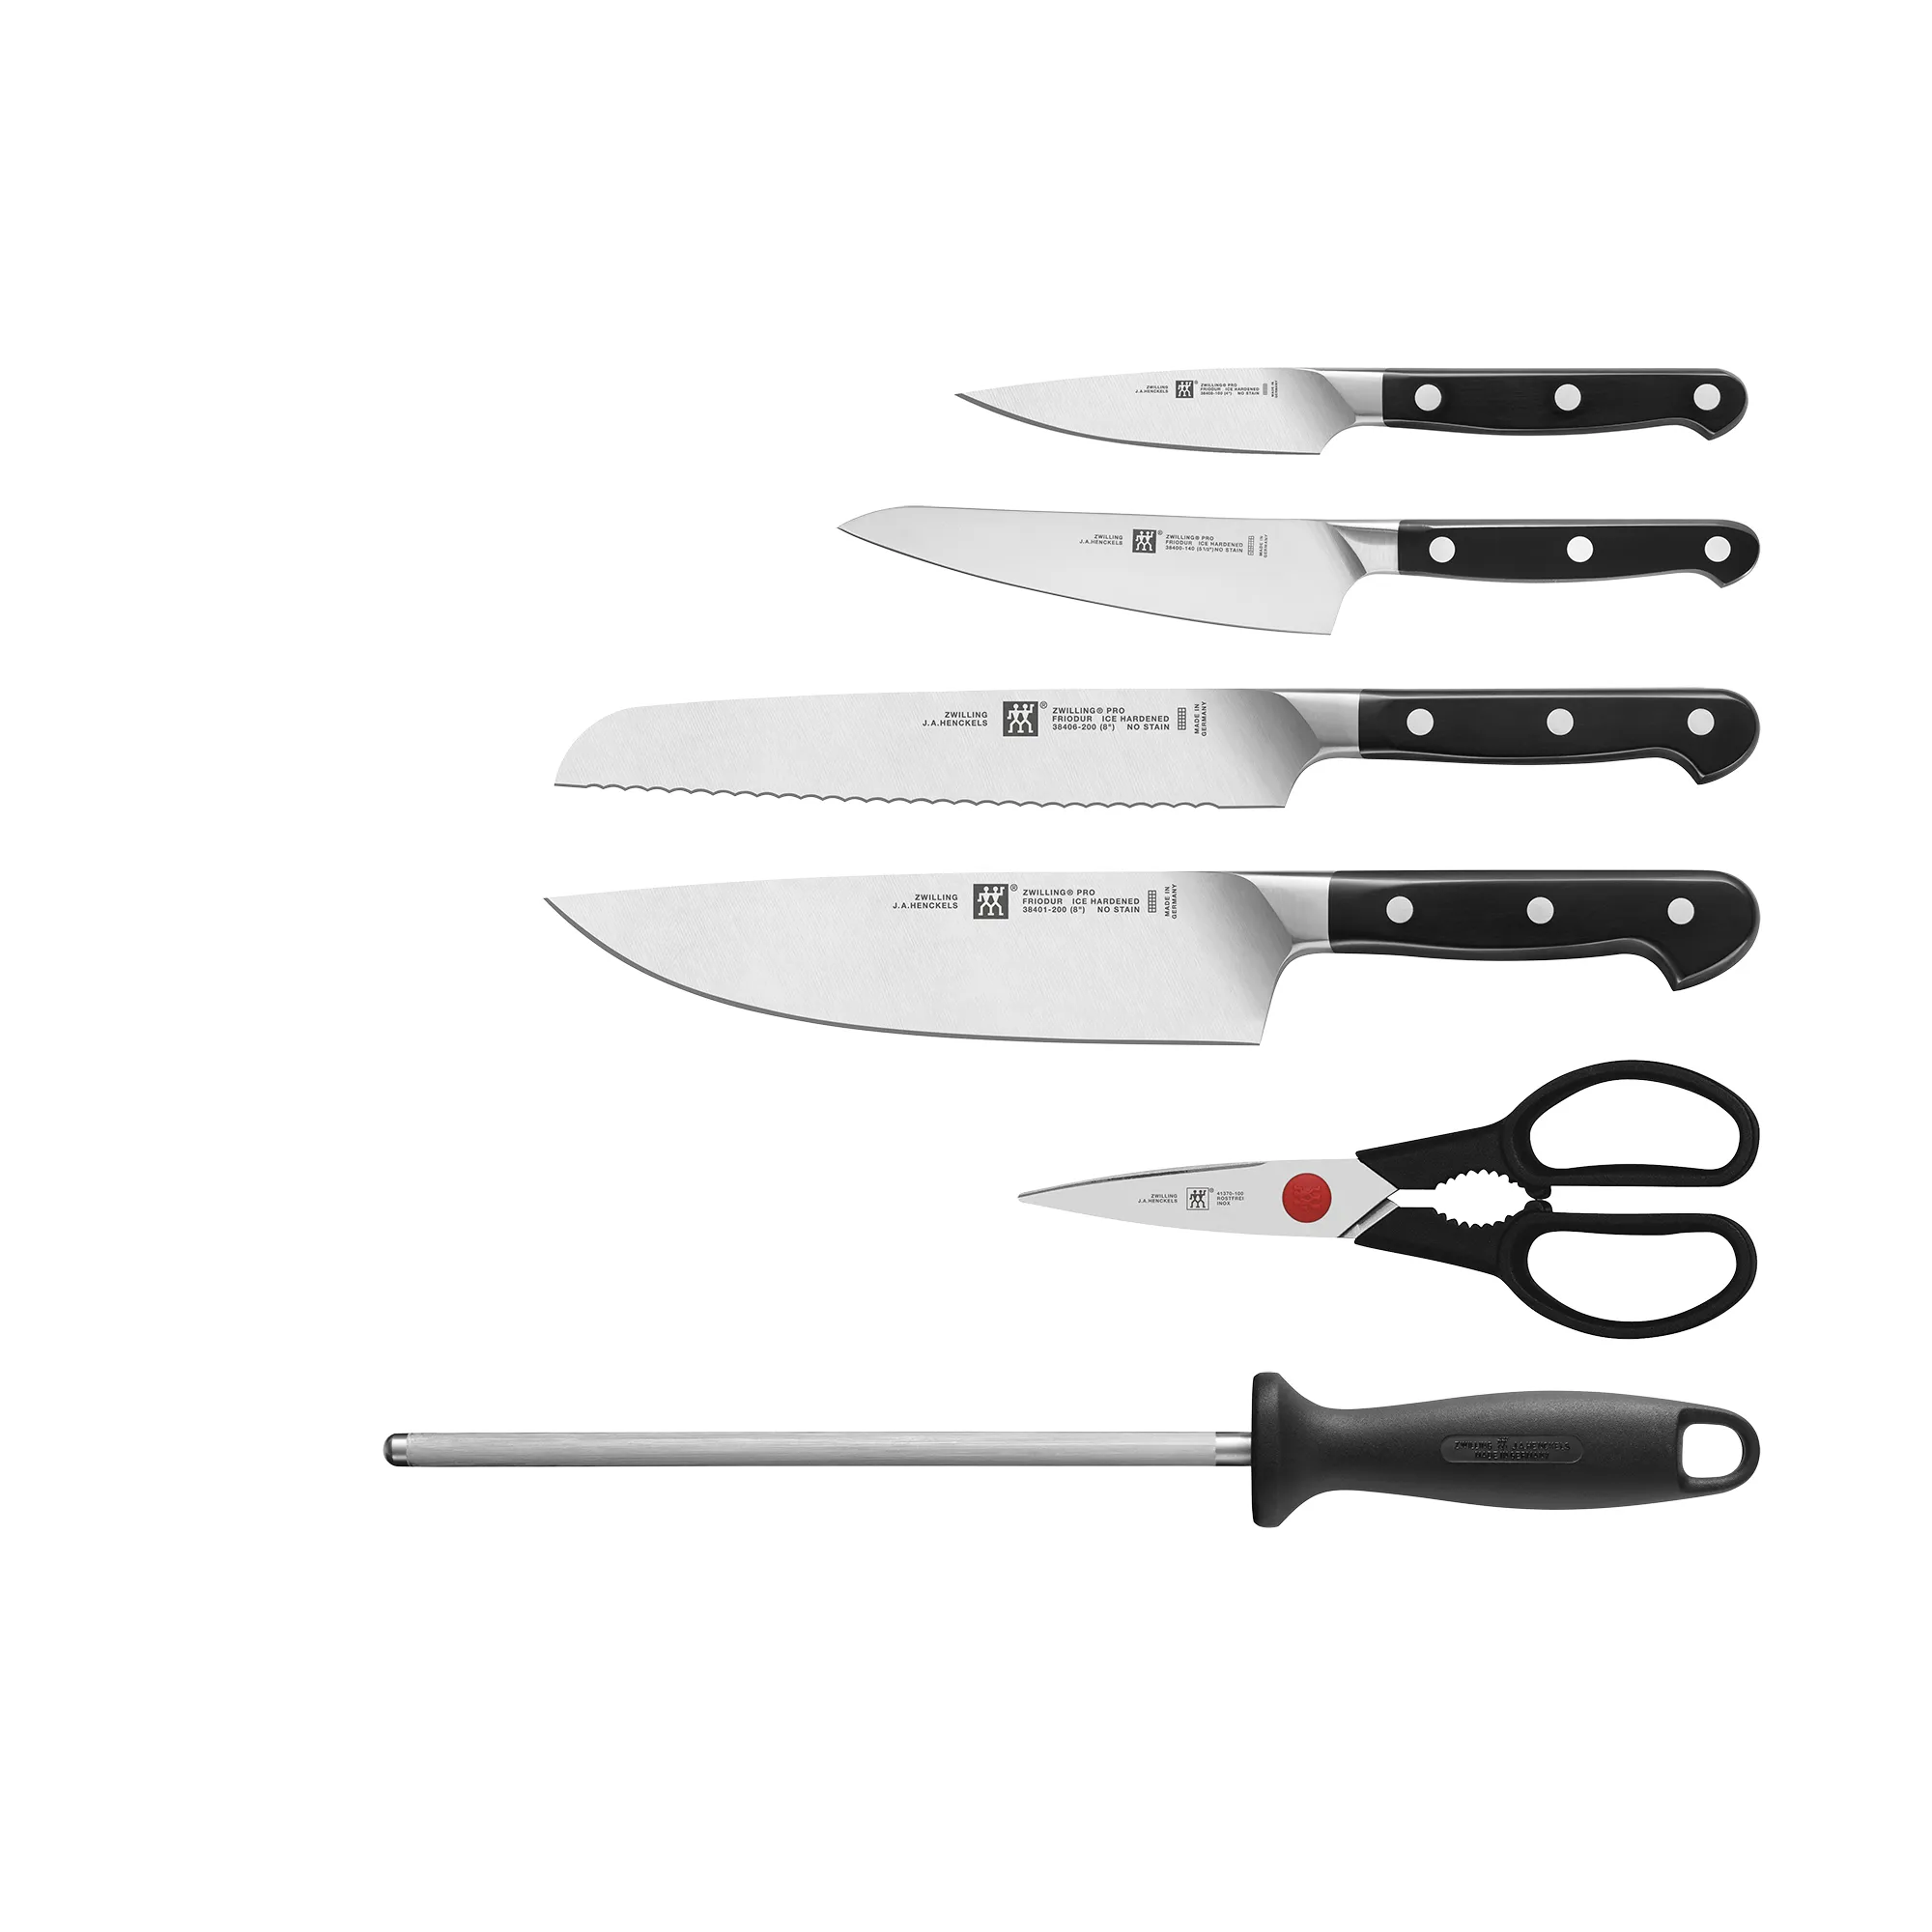 Zwilling Professional s 10-pc Knife Set With 17.5 Stainless